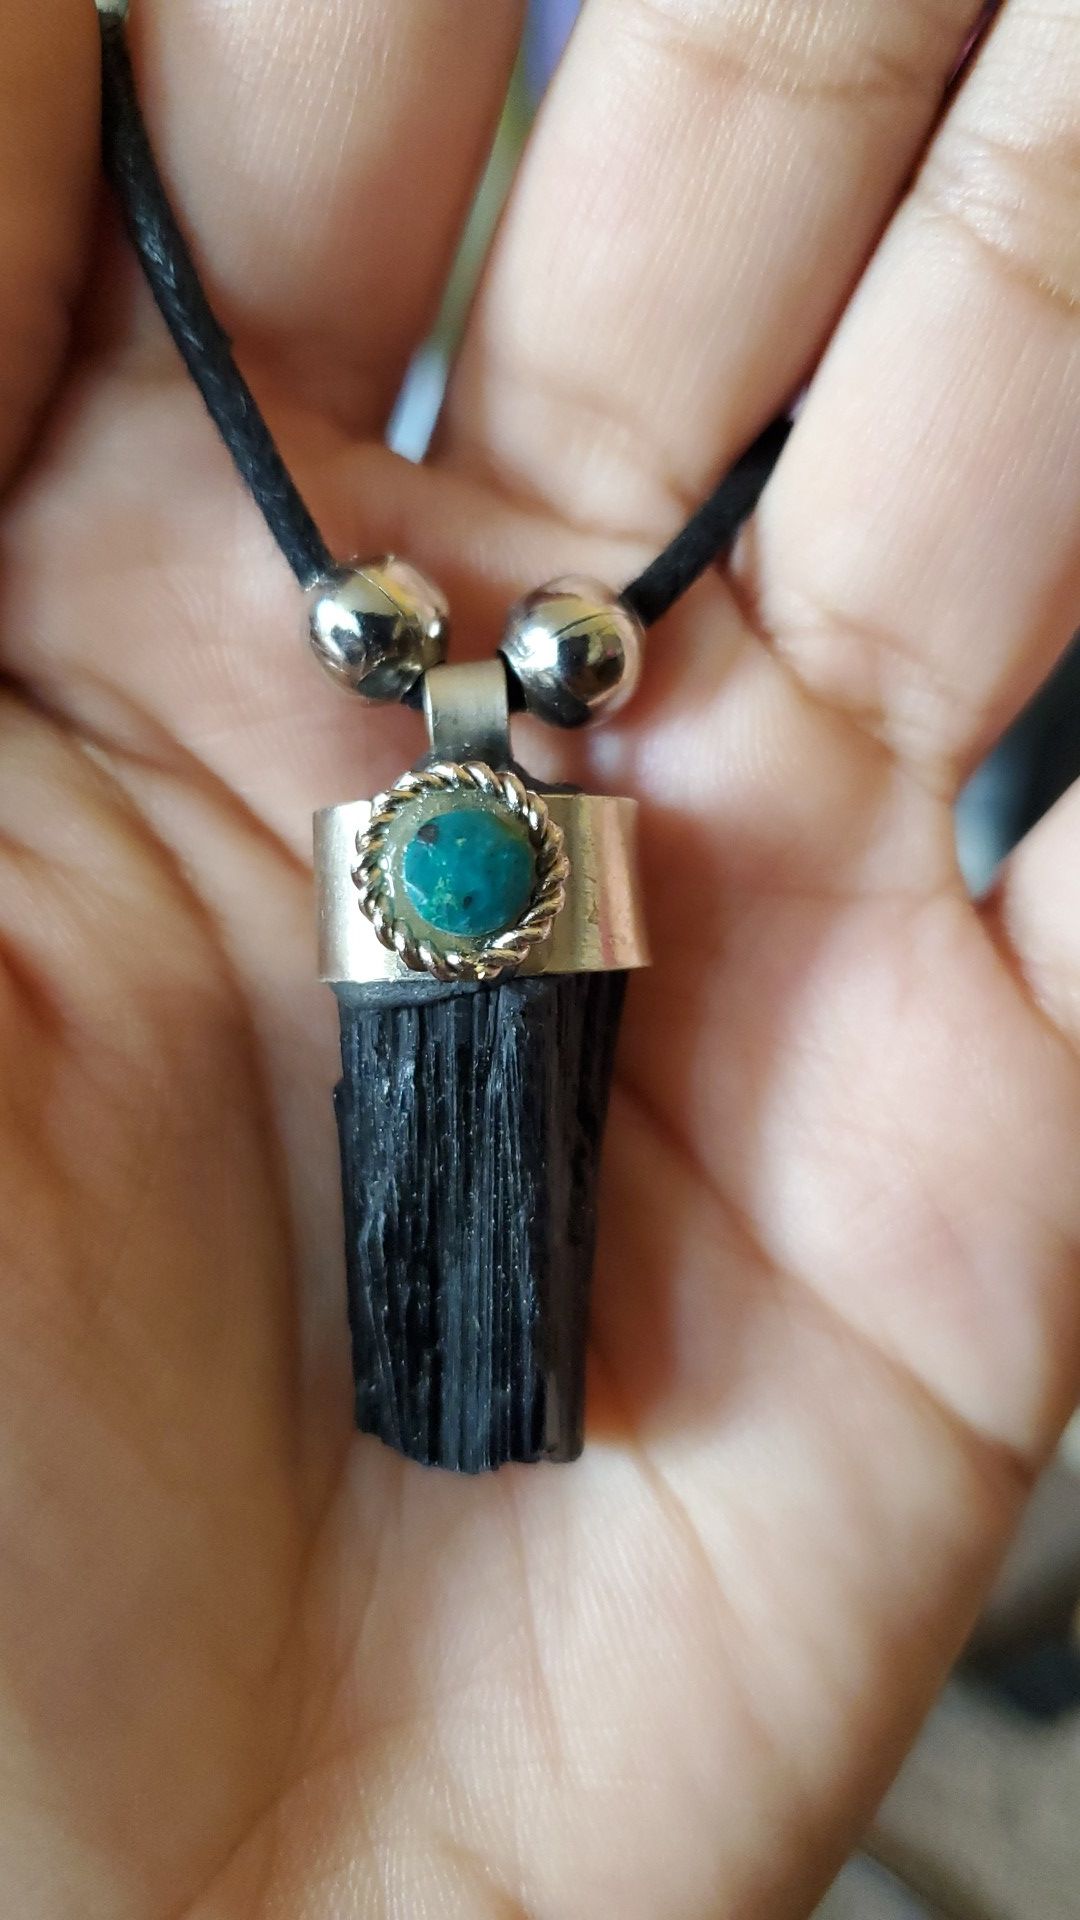 Black Tourmaline Necklace with Turquoise